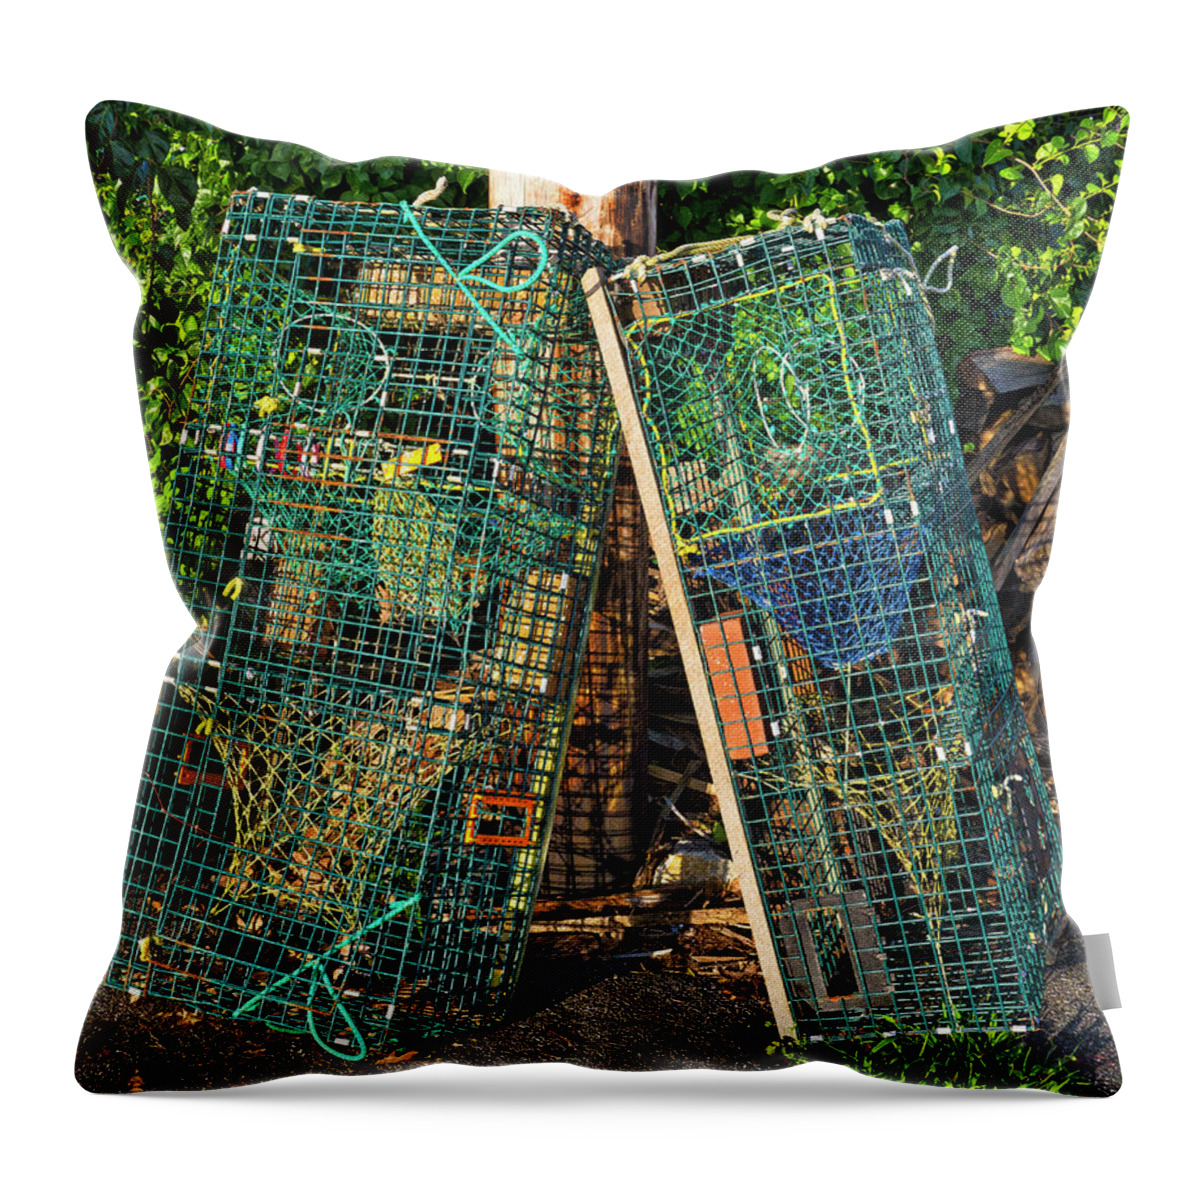 Maine Throw Pillow featuring the photograph Lobster Pots - Perkins Cove - Maine by Steven Ralser